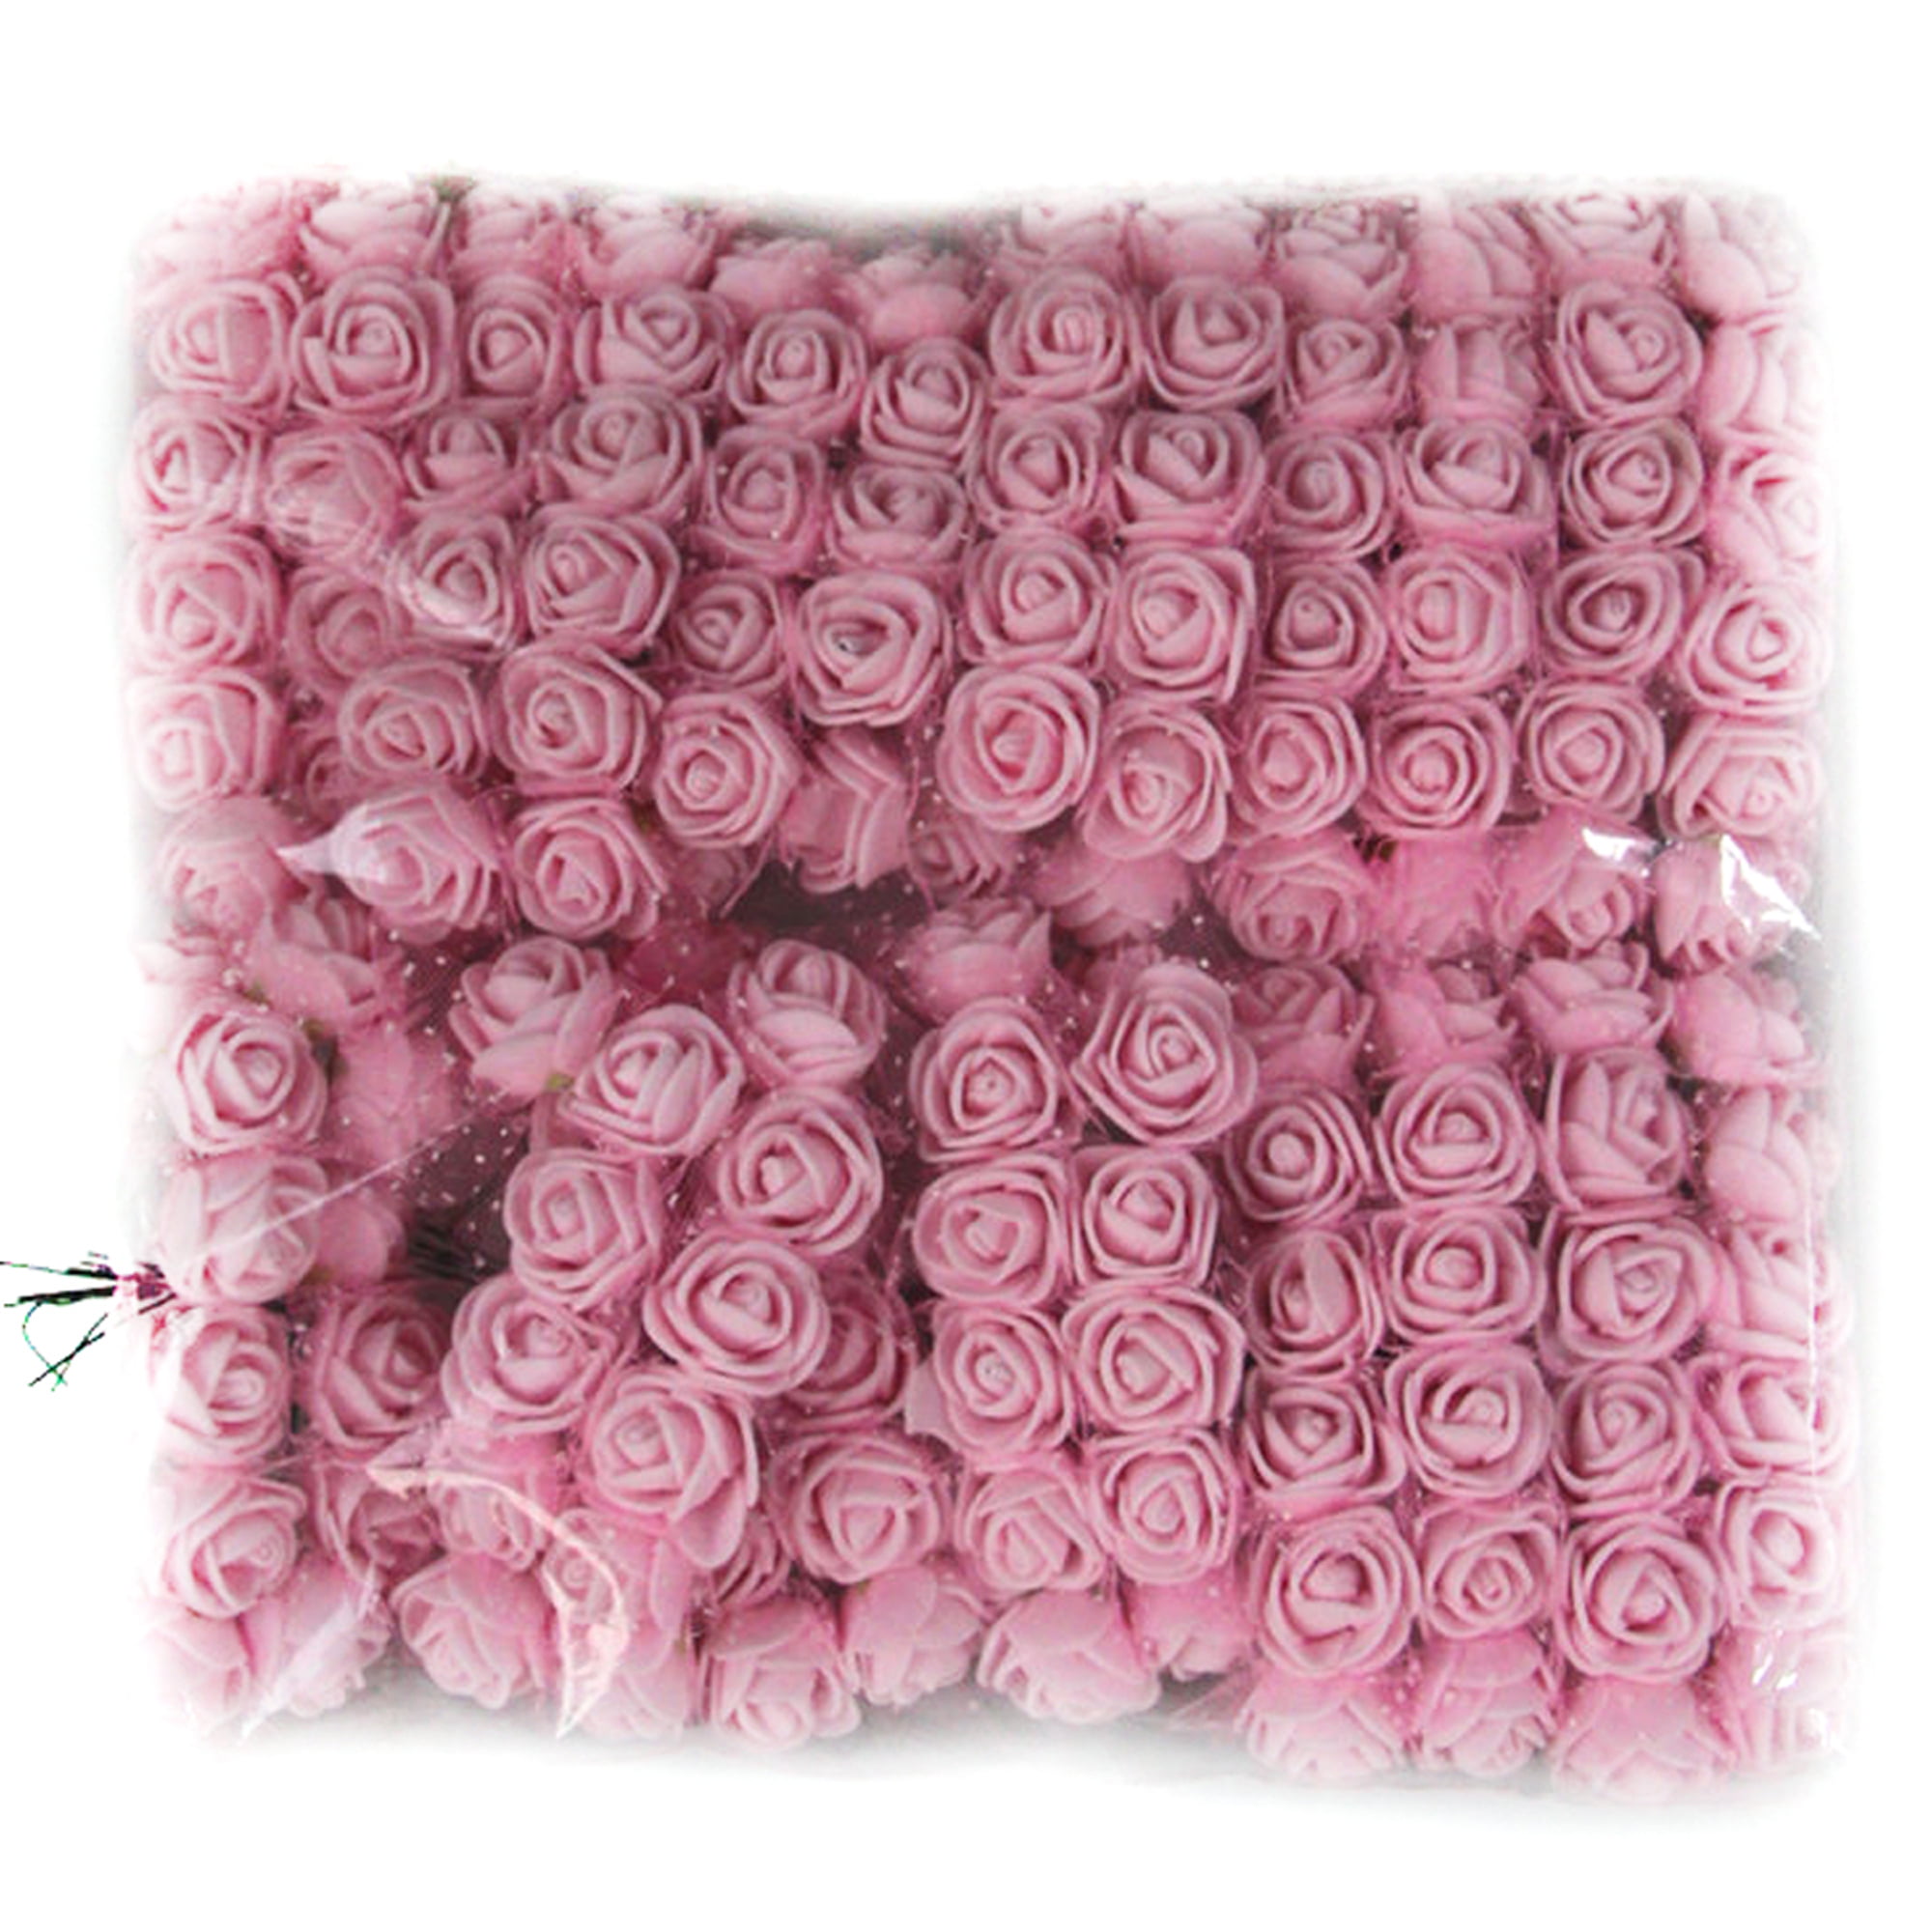 144 PCS small 2.5 cm Artificial Foam Roses with Leaf in white/Ivory/Pink Flowers 